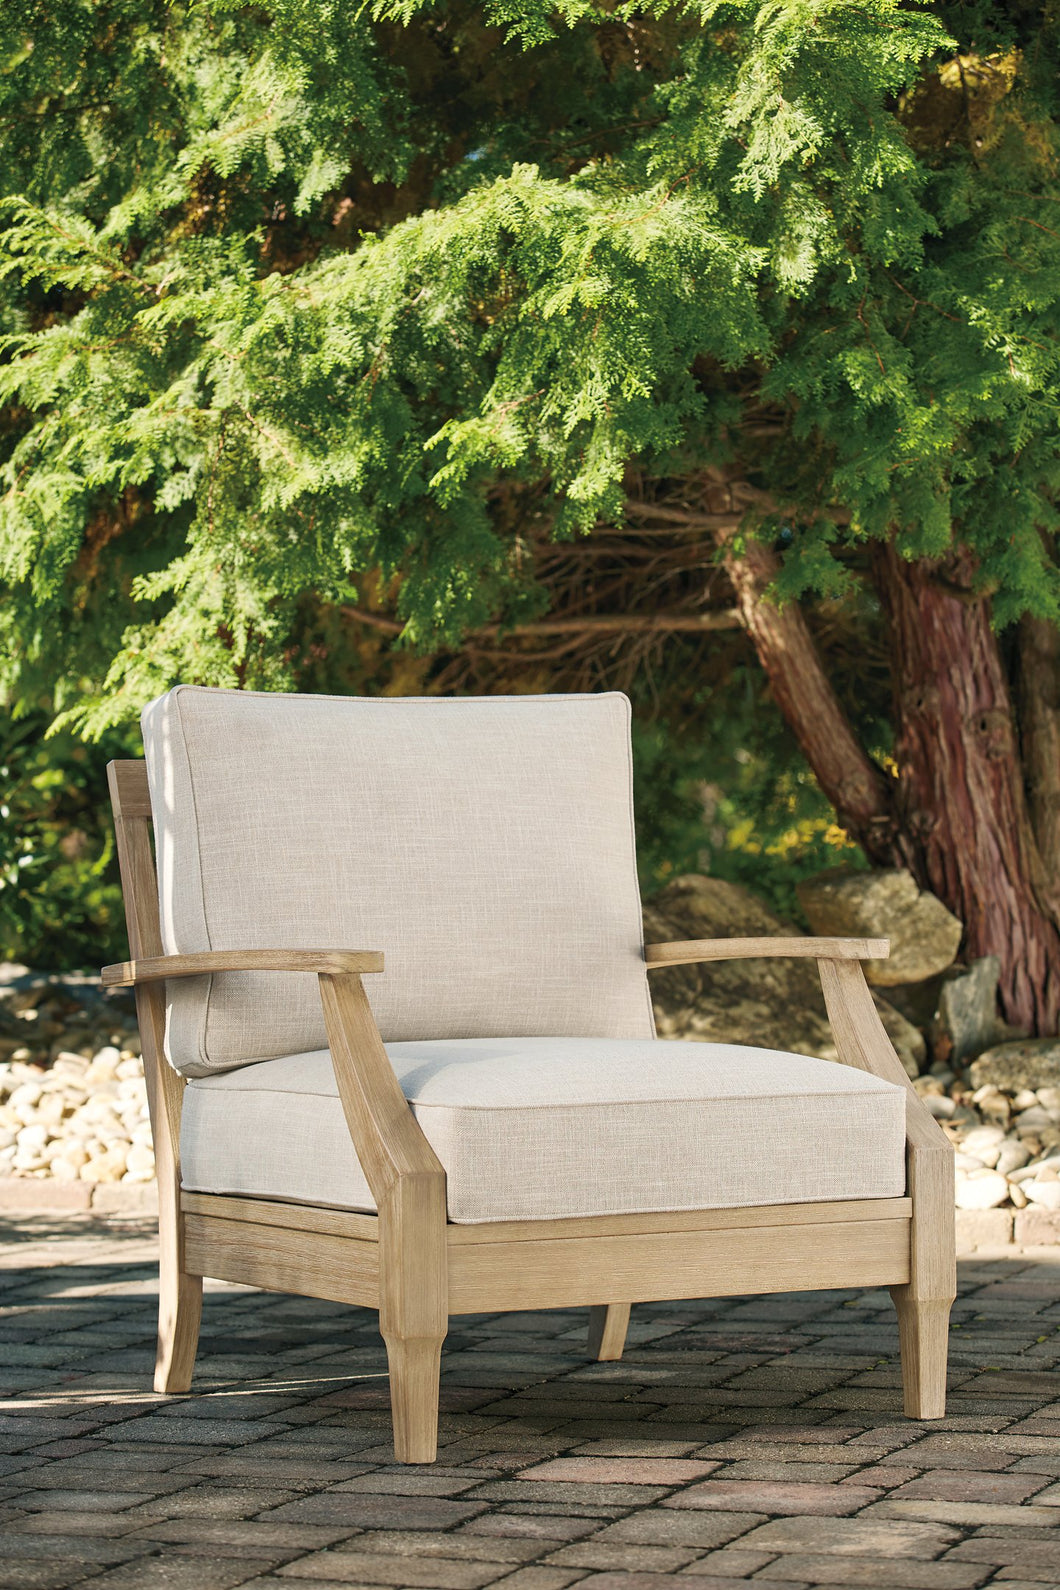 Clare View Signature Design by Ashley Lounge Chair image